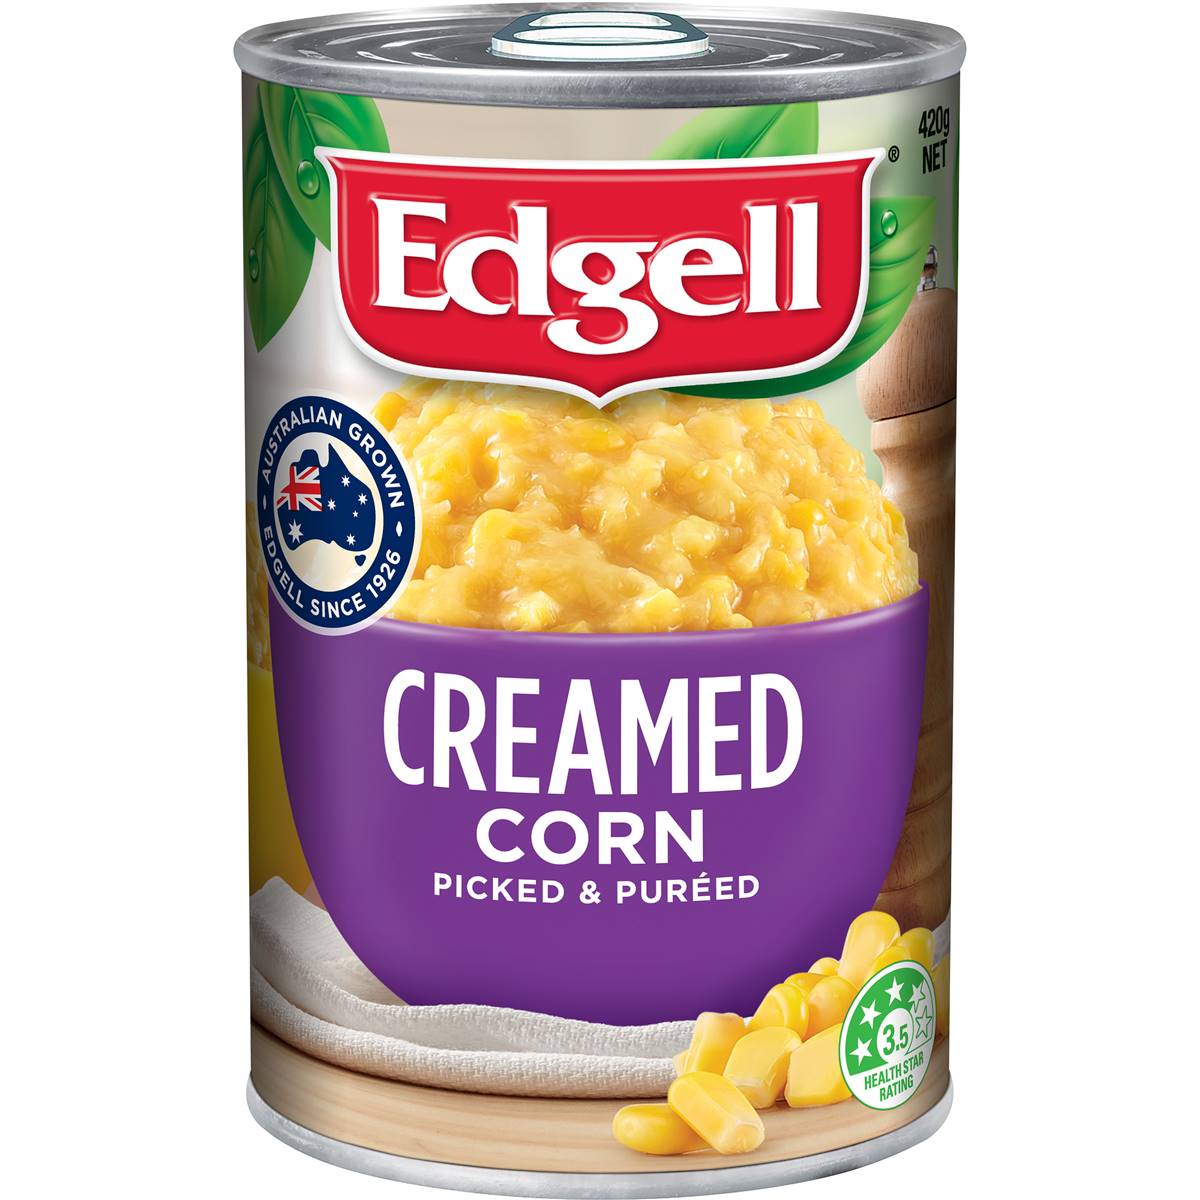 Calories in Edgell Creamed Corn Creamed